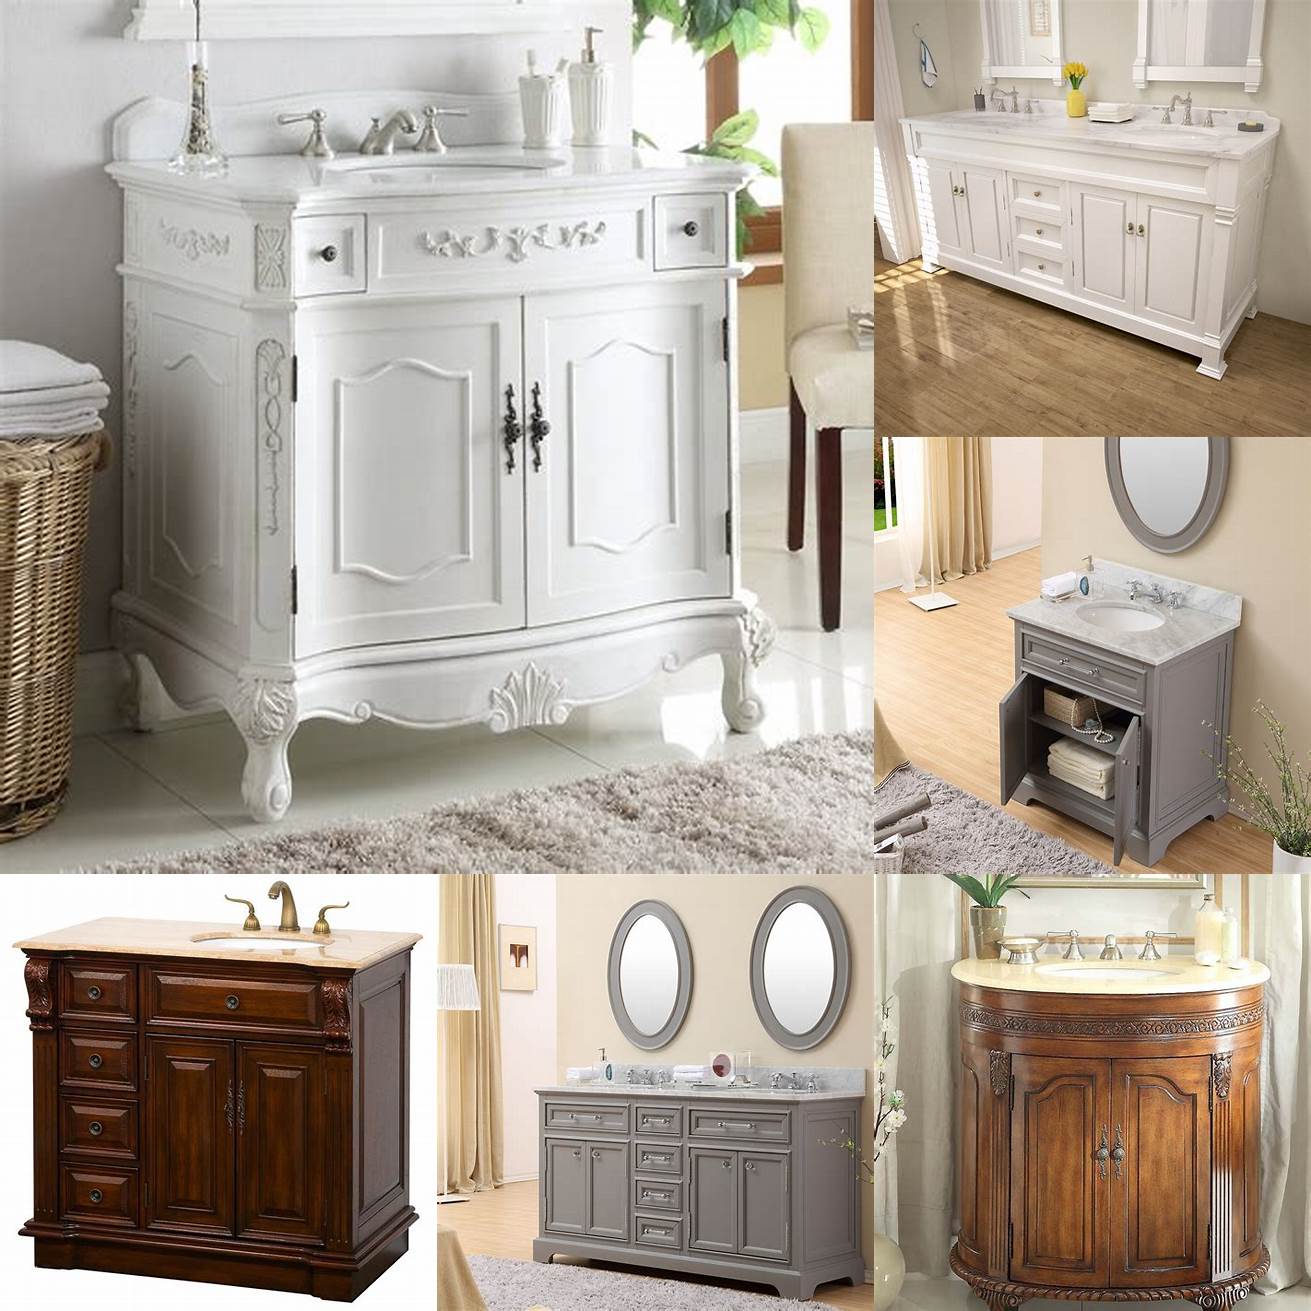 2 Traditional Traditional vanities are classic and elegant